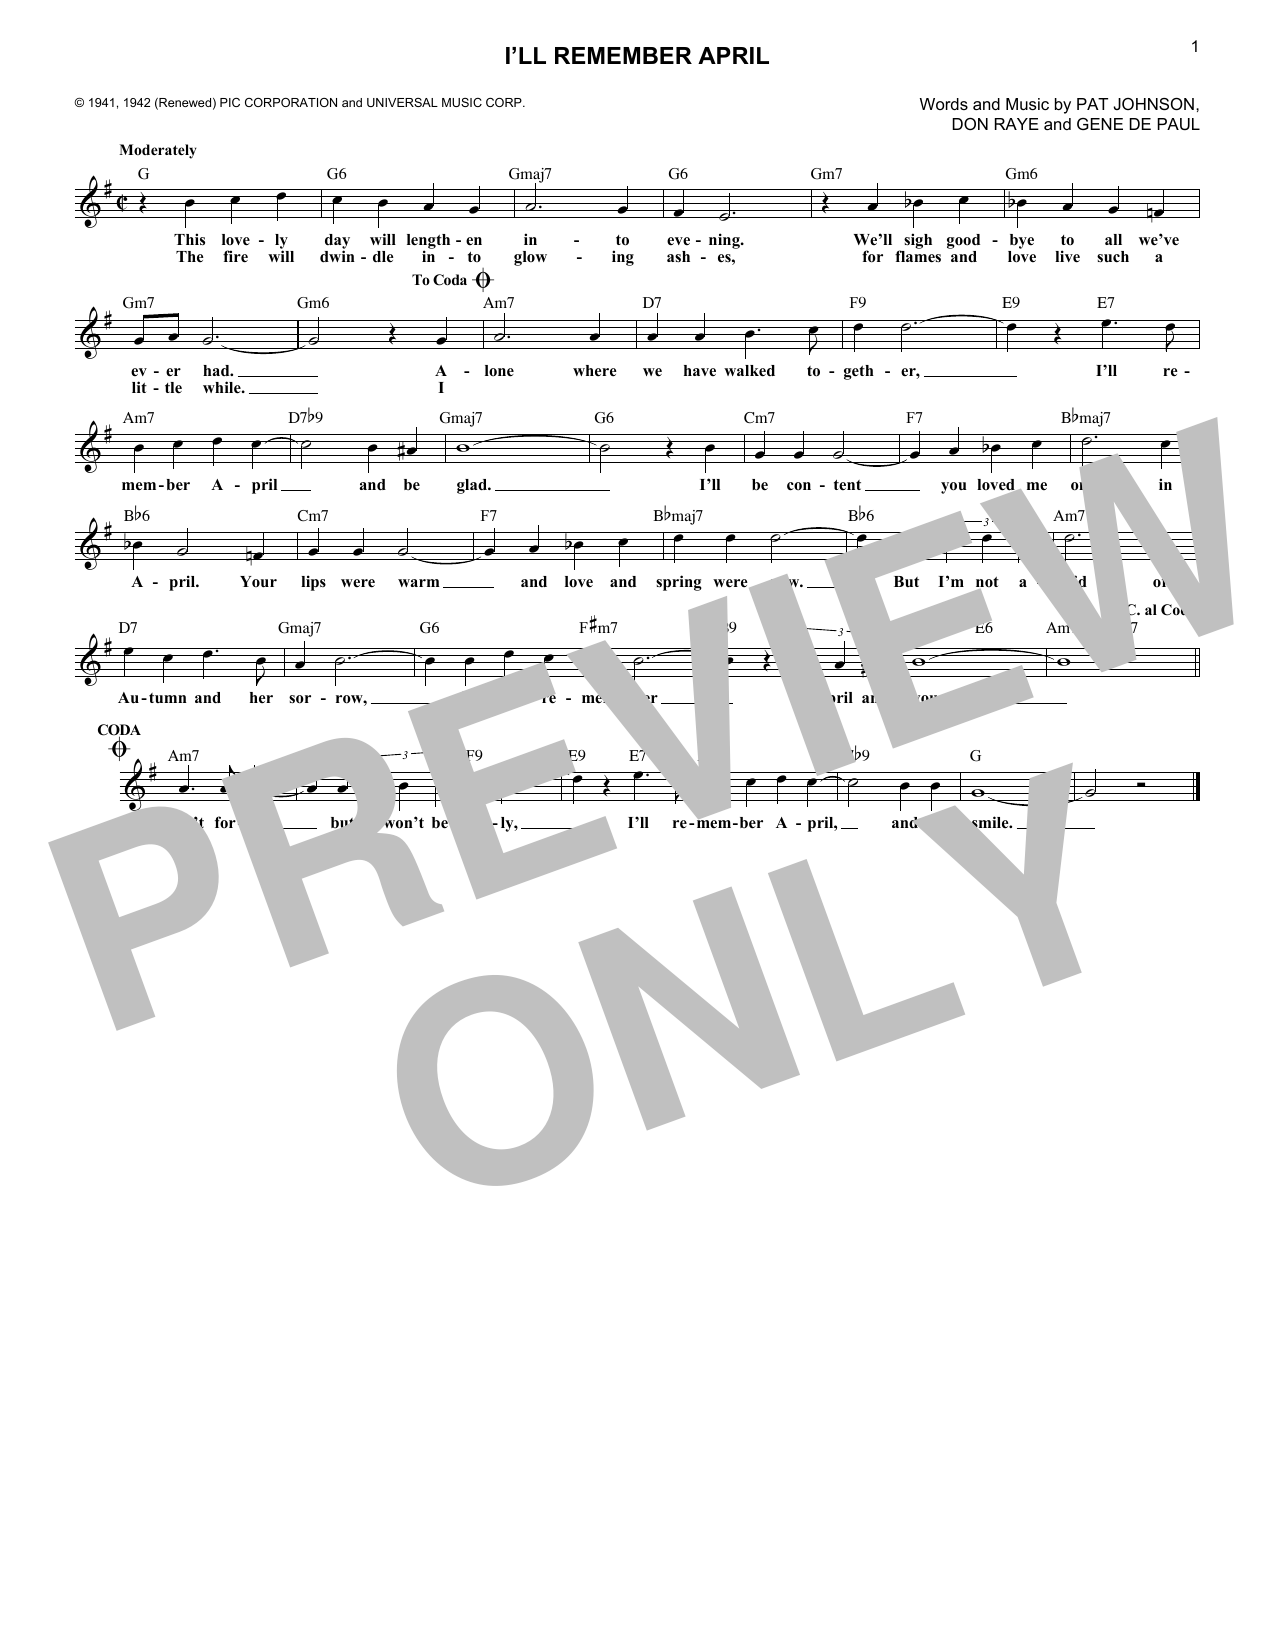 Download Woody Herman & His Orchestra I'll Remember April Sheet Music